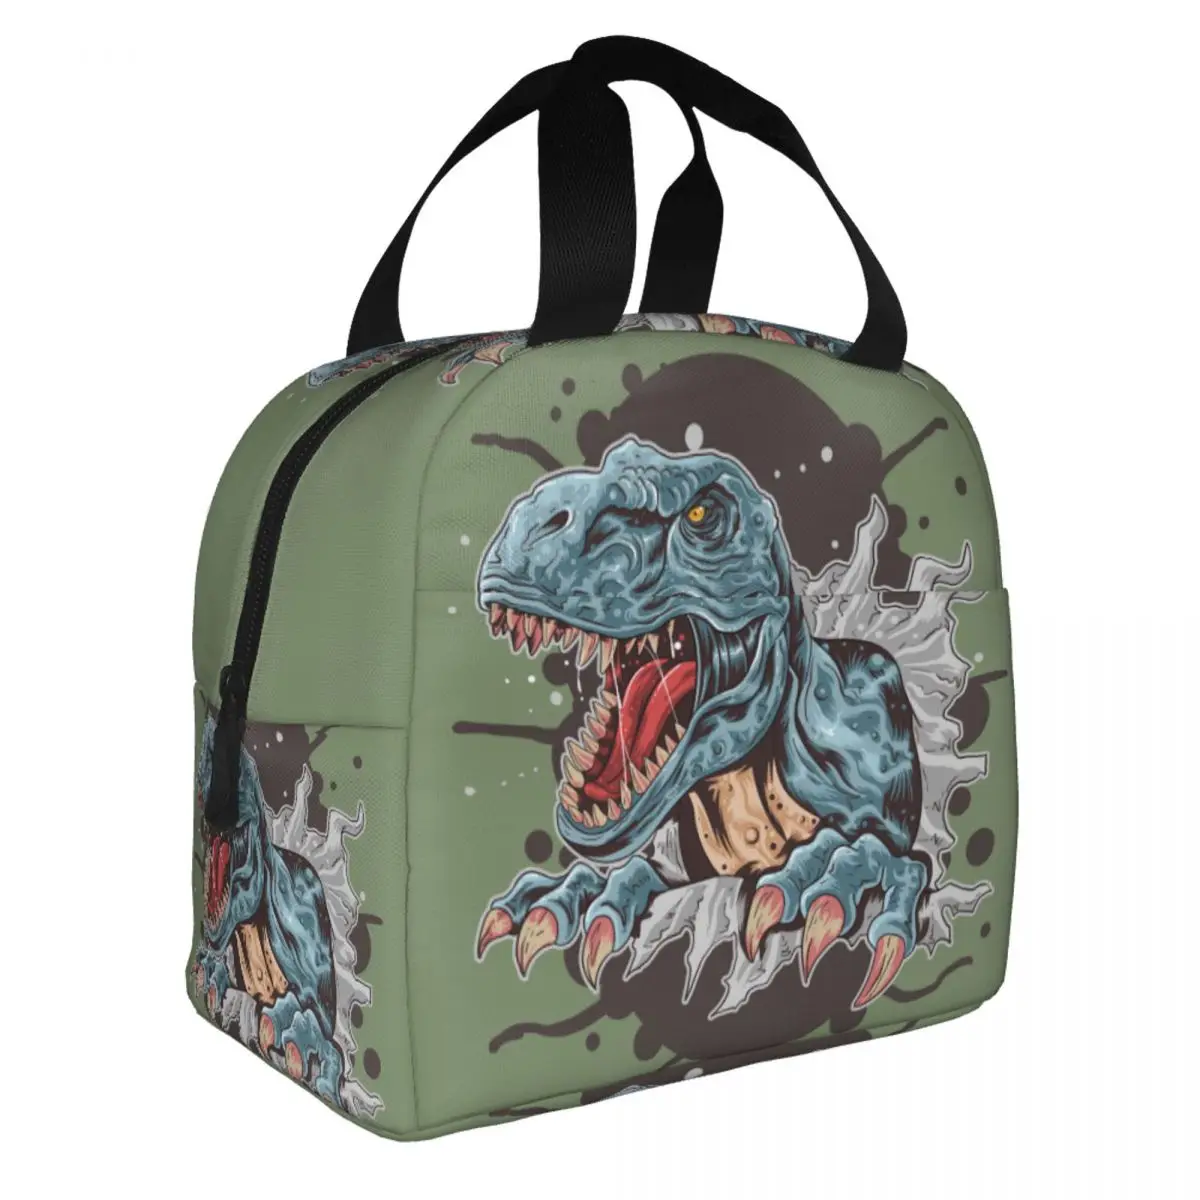 

T Rex Dinosaur Print Lunch Bag for Women Resuable Insulated Thermal Cooler Cartoon Dino Lunch Box Office Picnic Travel Food Bags